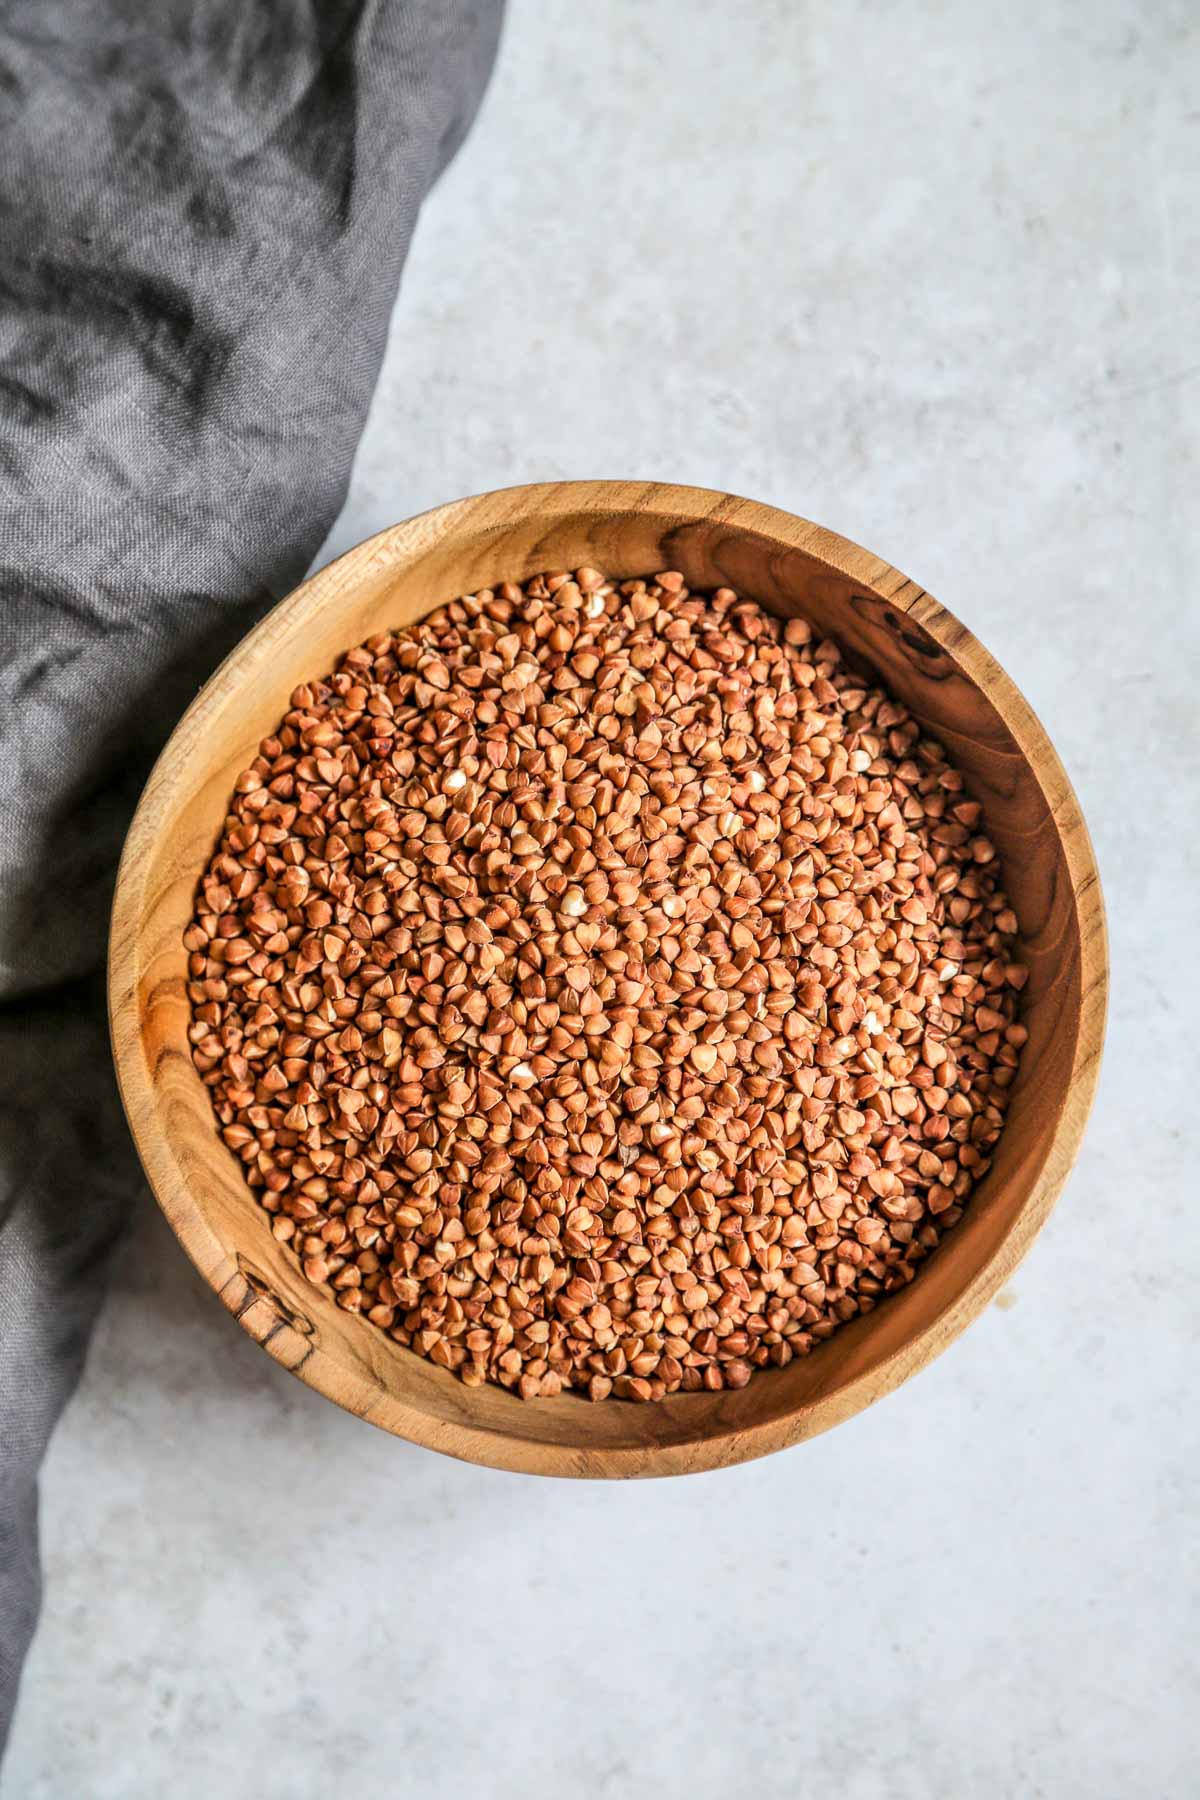 uncooked buckwheat groats in a wooden bowl